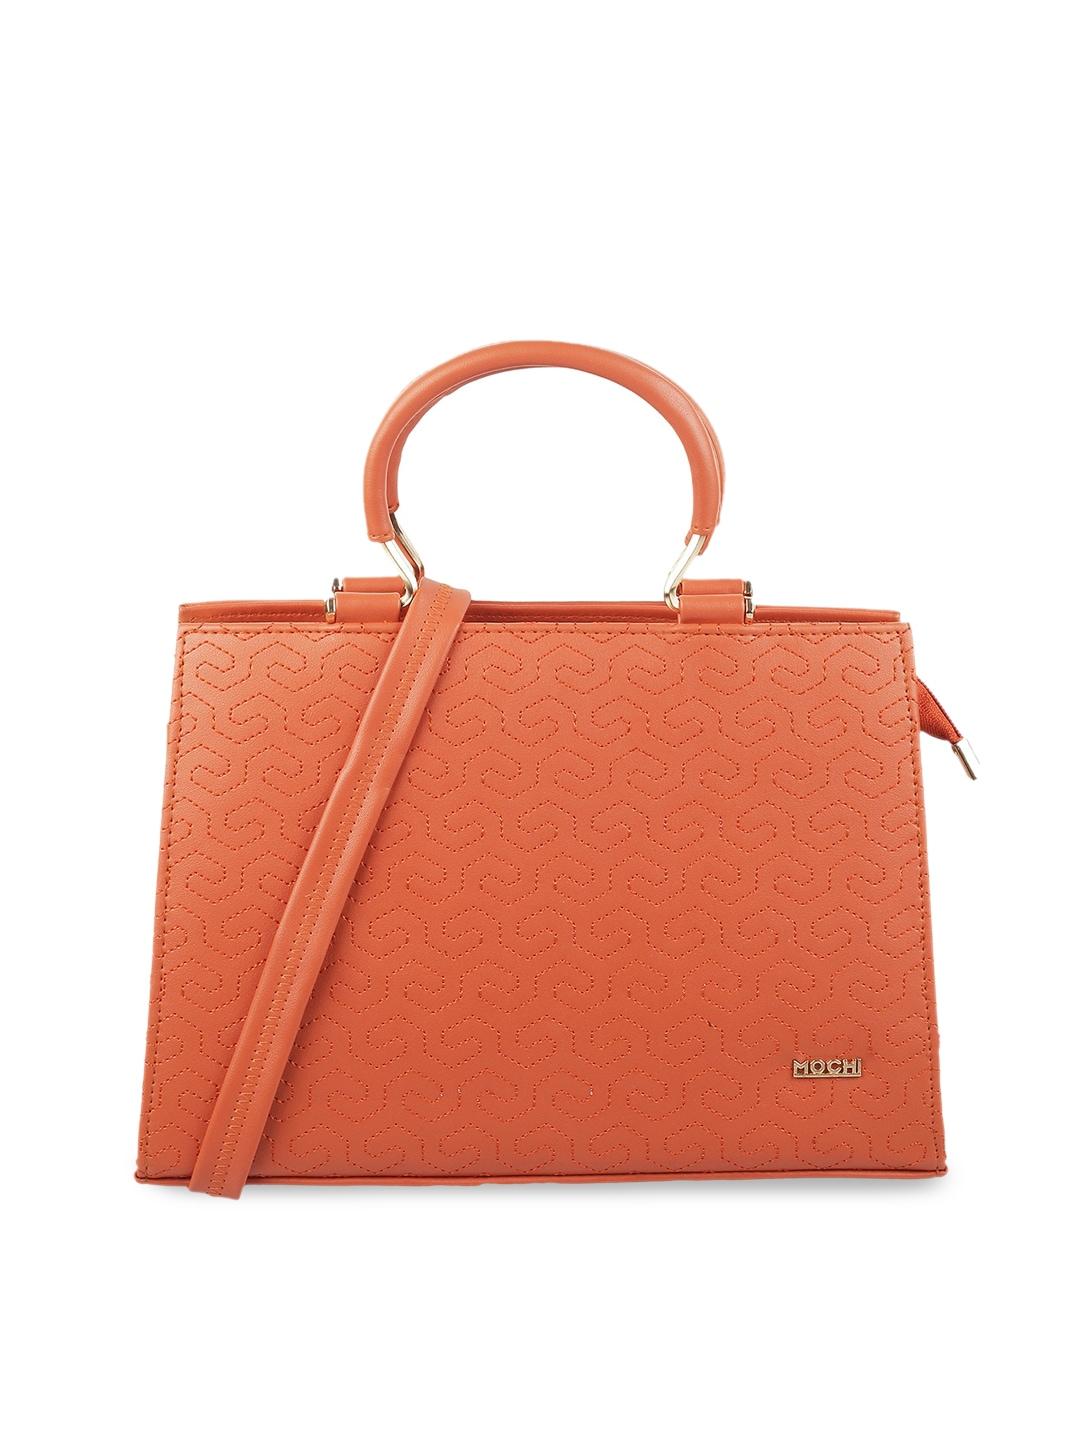 Mochi Orange Textured Structured Handheld Bag with Quilted